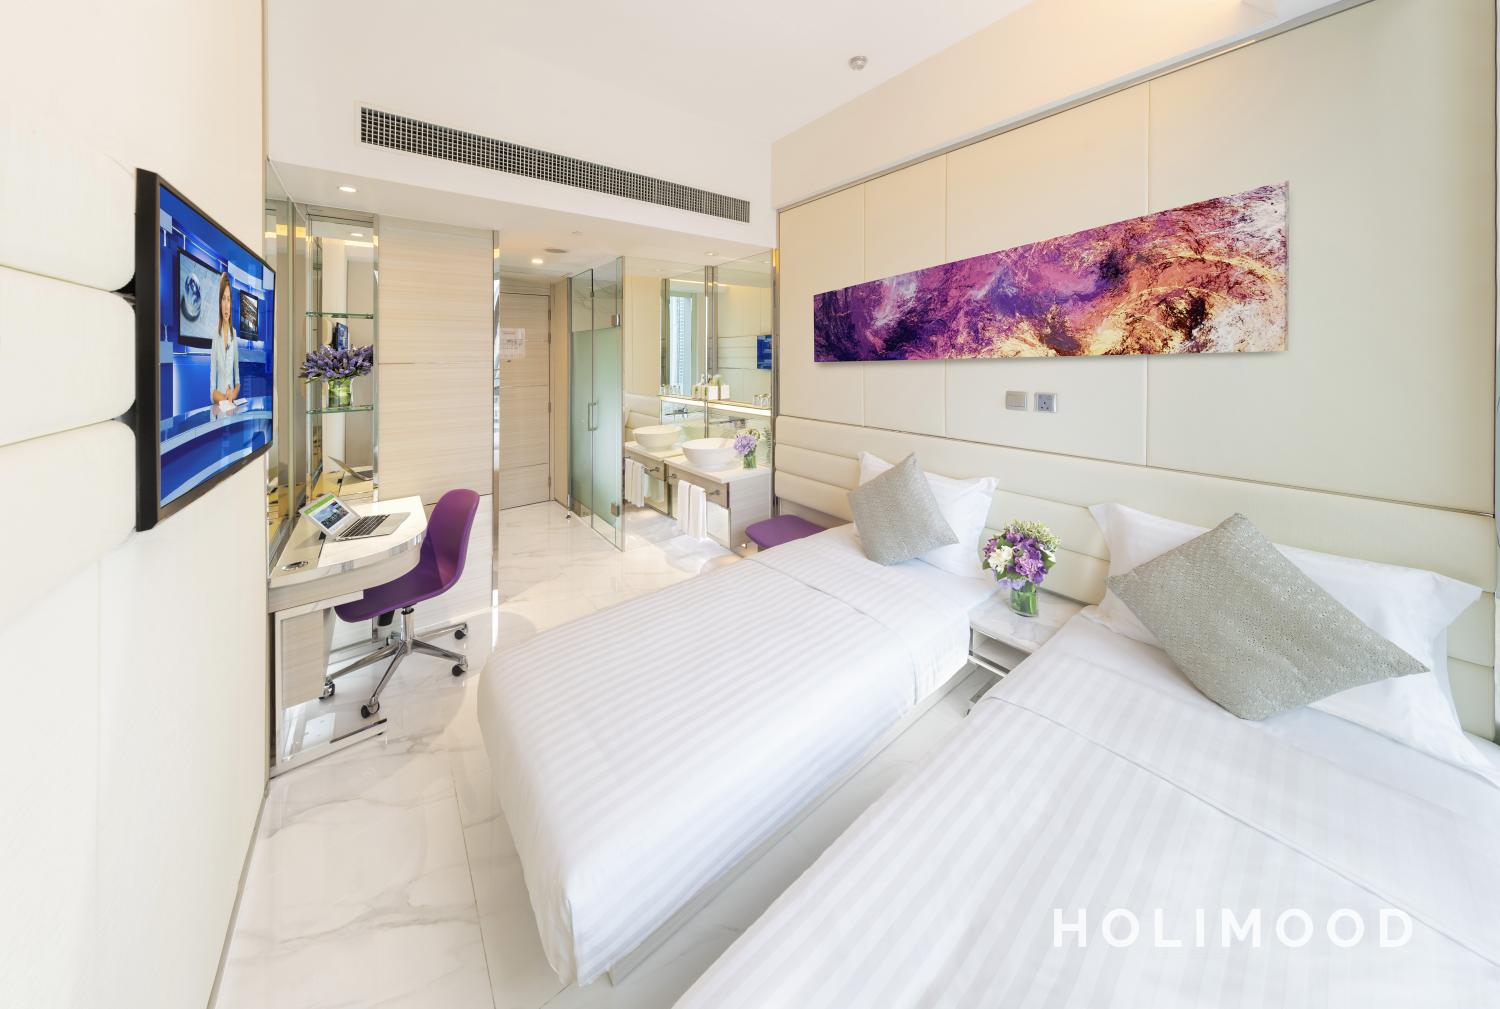 iclub Mong Kok Hotel 【iGather Room Package】iSelect / iPlus Room + Continental Breakfast + Late Check-out until 2pm + Complimentary Usage of the Club House Facilities｜iclub Mong Kok Hotel 2